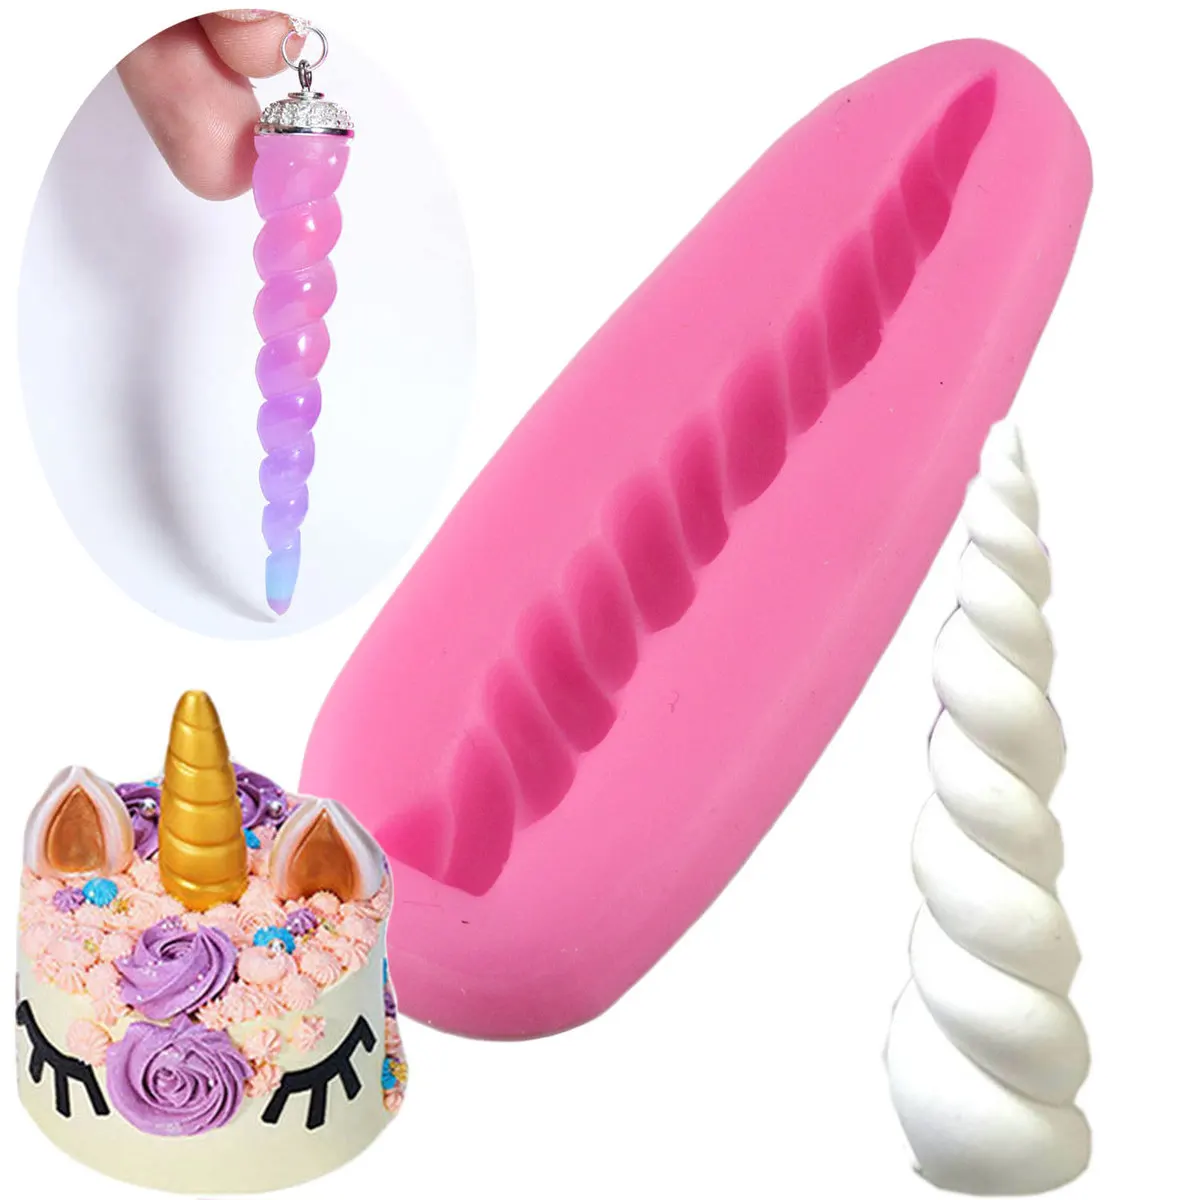 

Mujiang 3D Unicorn Horn Silicone Mold Polymer Clay Pendulum Pendant Mold Candy Chocolate Mould Fondant Cake Decorating Tools